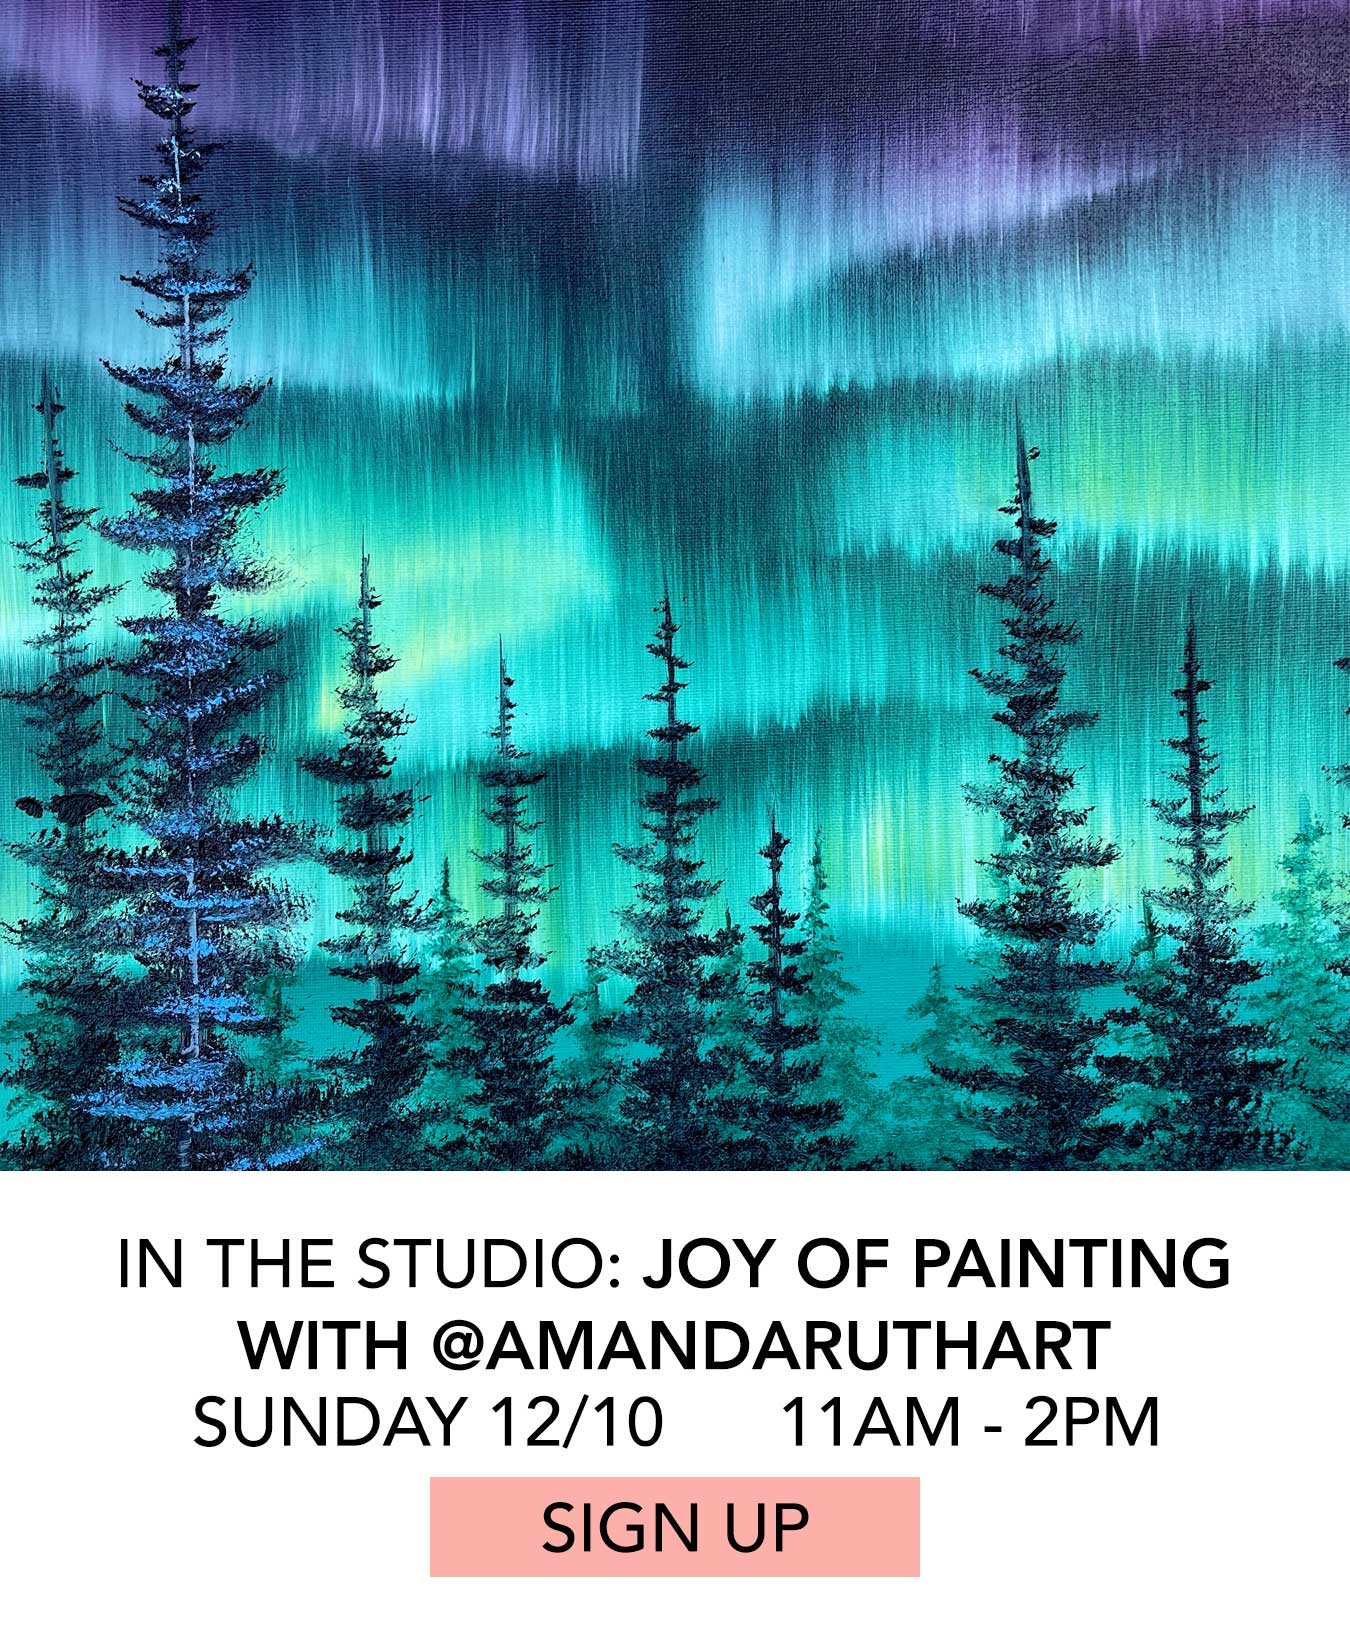 In the Studio: Joy of Painting with @AmandaRuthArt. Sunday 12/10 from 11am to 2pm. Click to Sign Up.